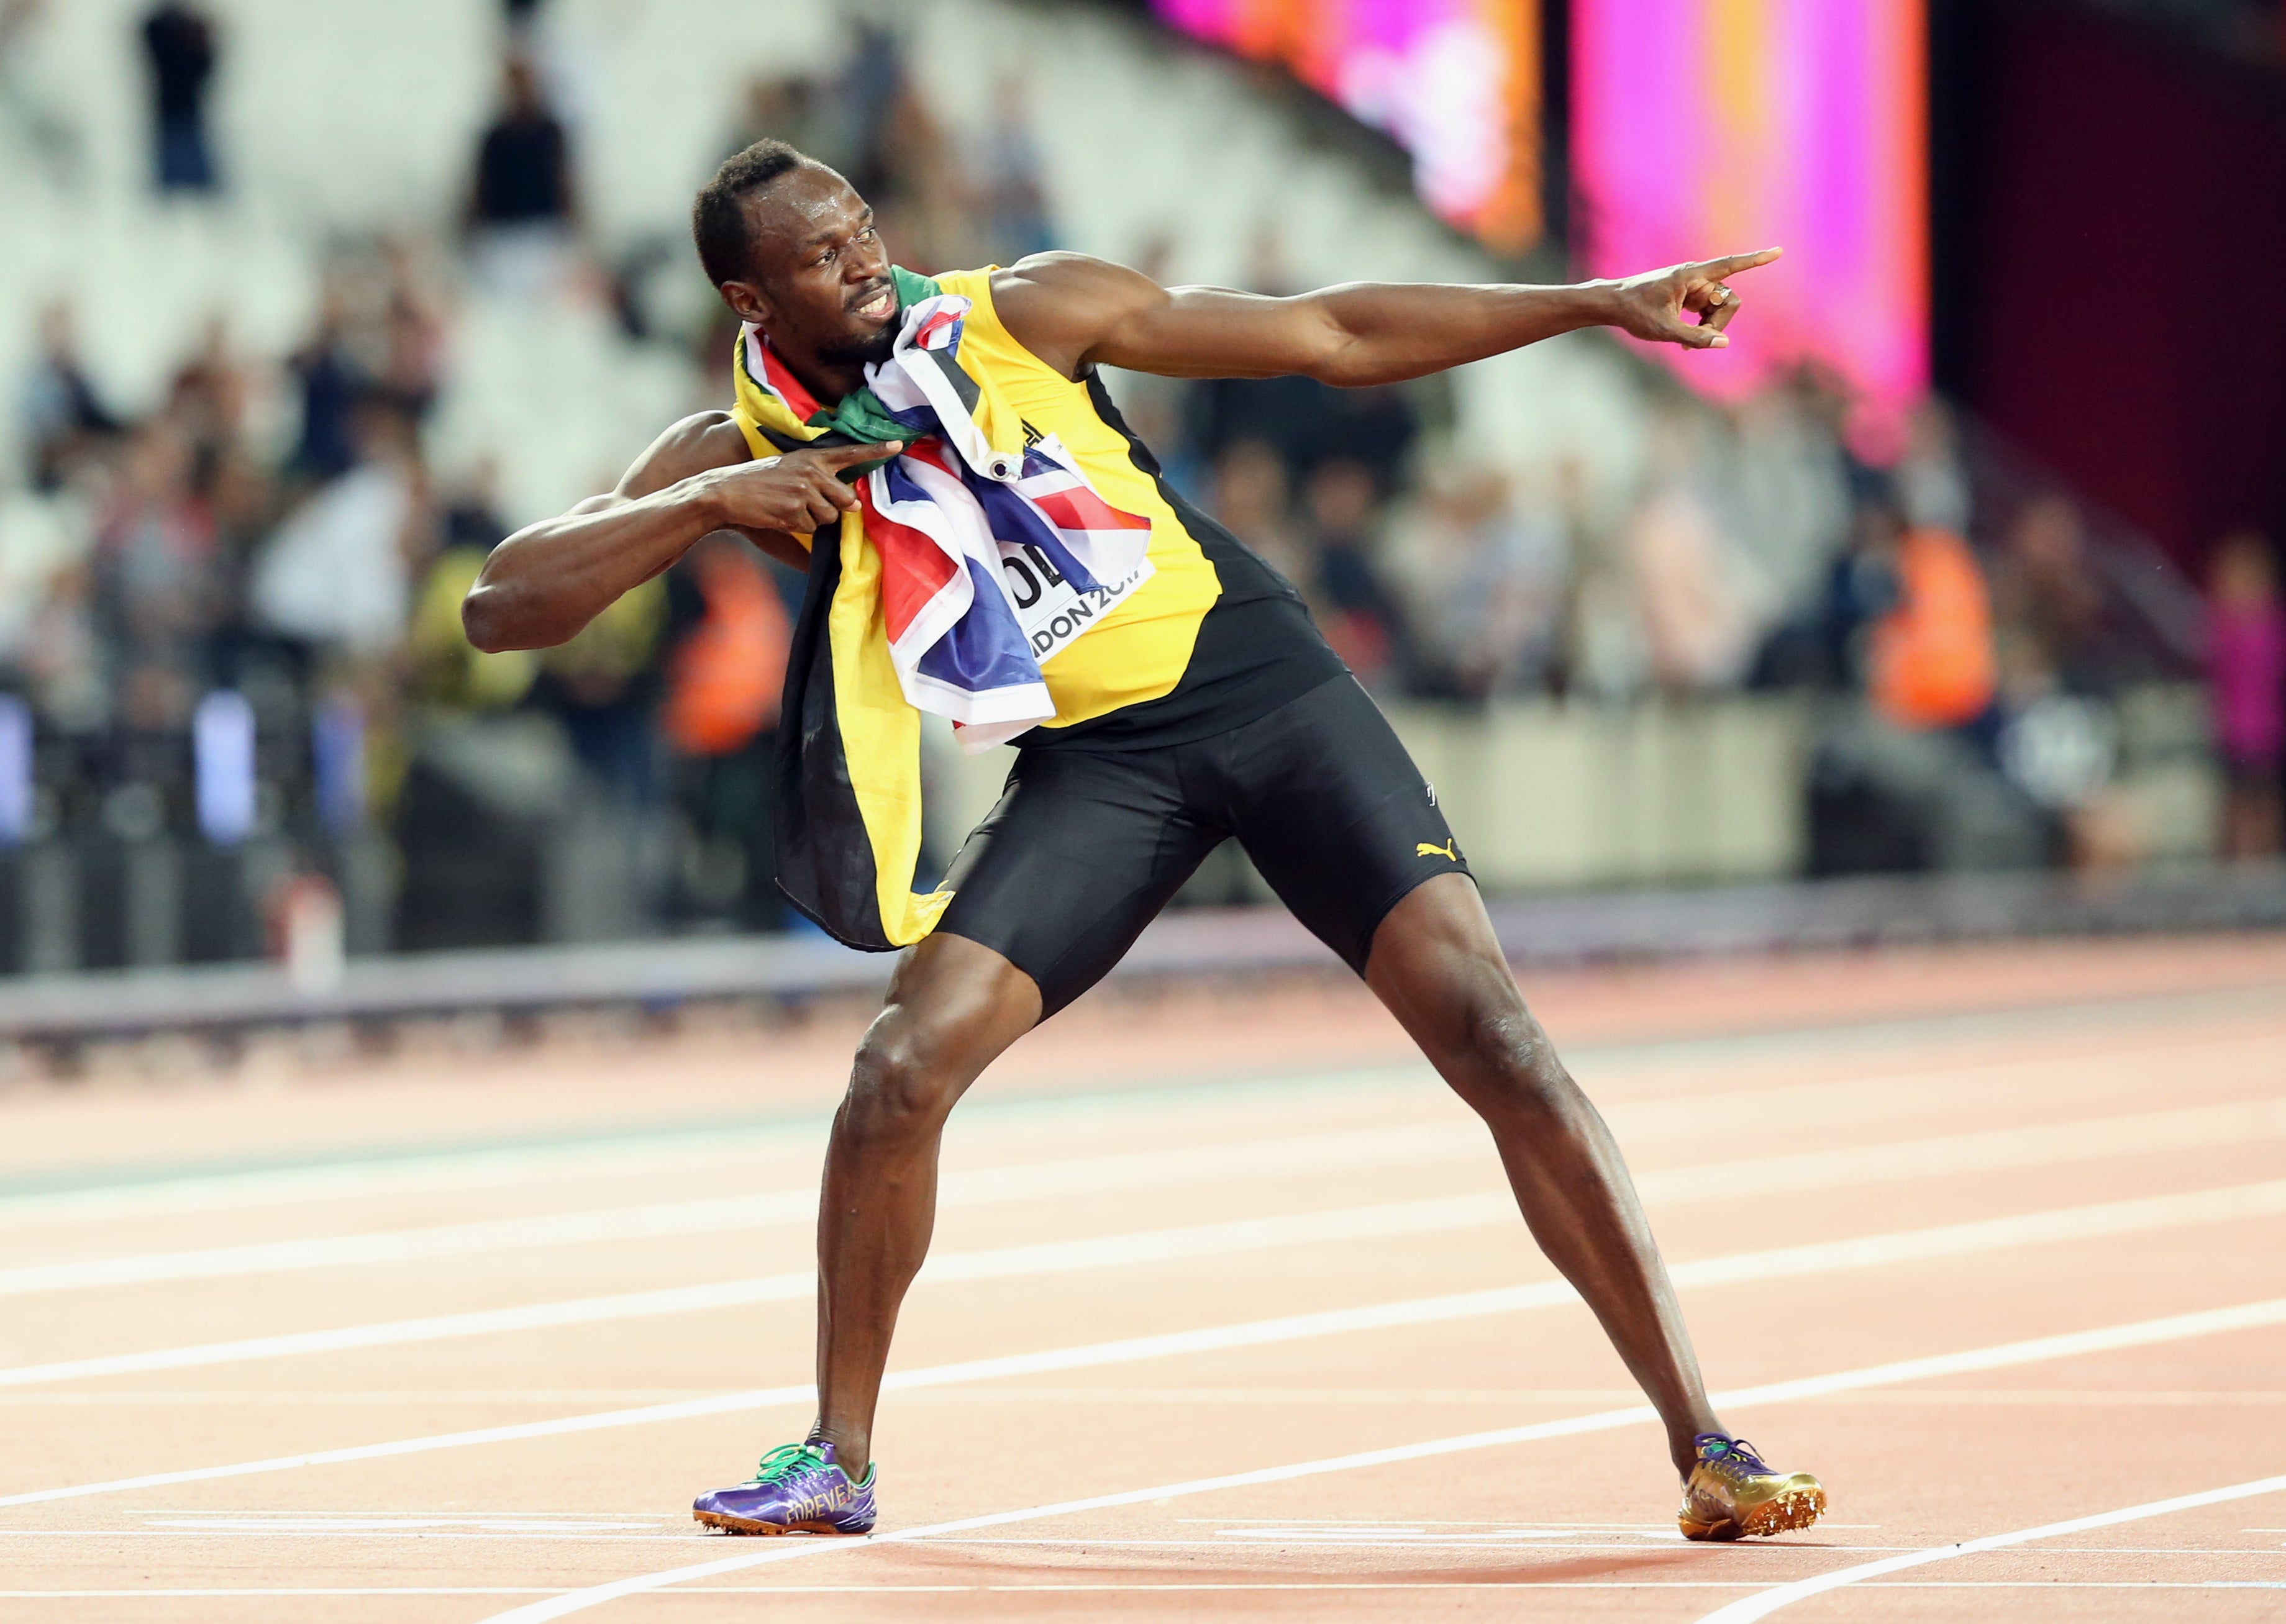 Athletics: Usain Bolt files for trademarks to protect his victory pose |  The Straits Times